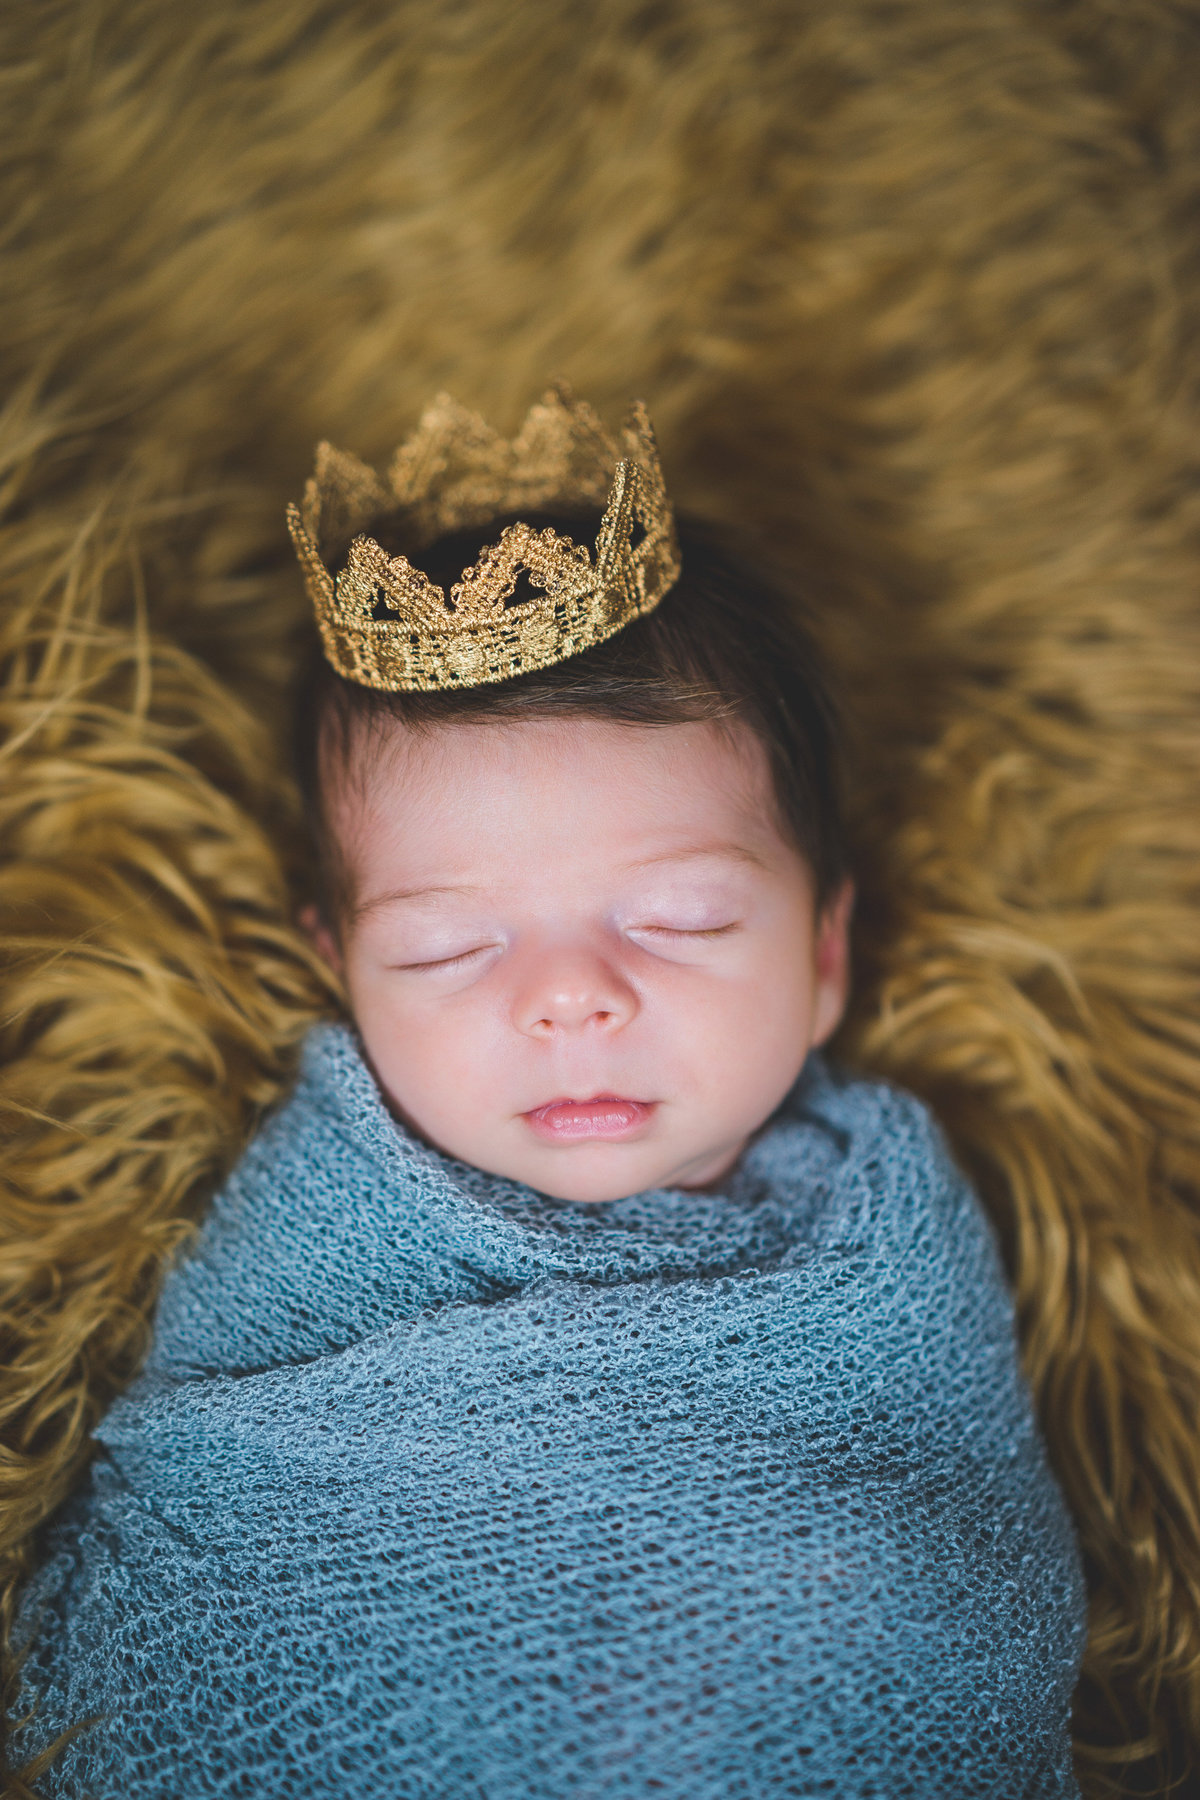 Newborn baby wrapped in cheesecloth blanket wearing a gold crown laying on furry blanket in San Antonio Photography studio.